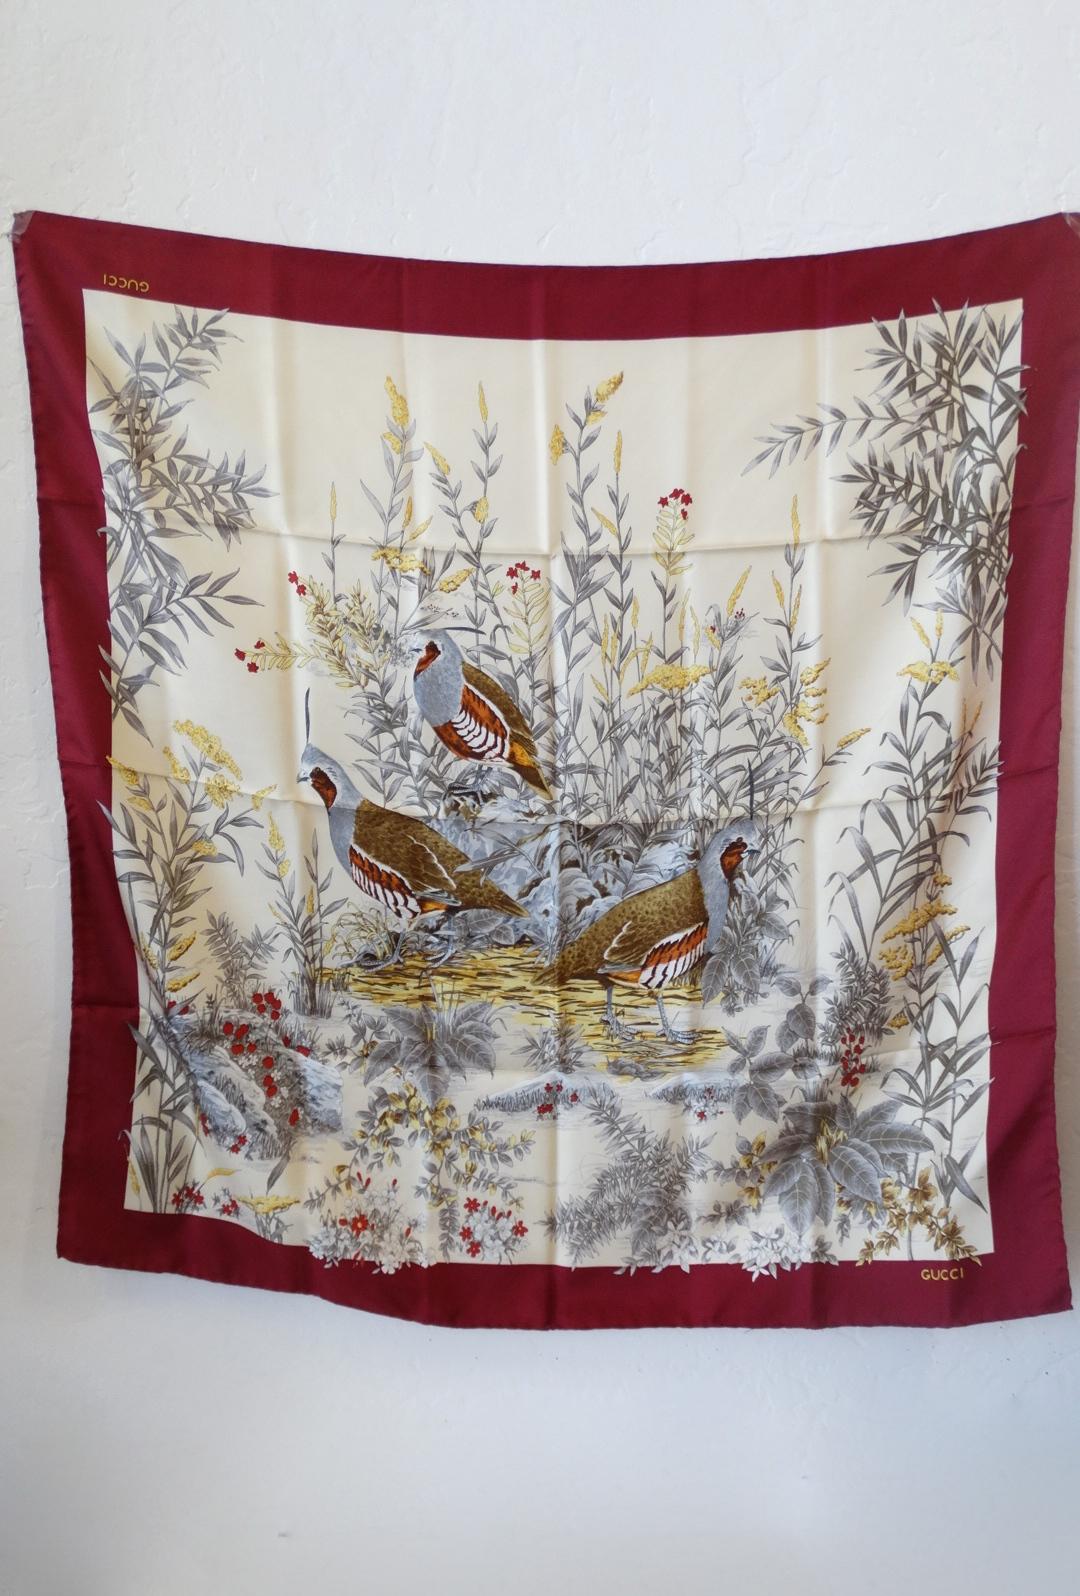 The perfect piece for the holiday season- Aviary 1980s Gucci silk scarf! Printed with an earthy toned scene of several Quail birds standing in the desert brush. Deep red border along the perimeter of the scarf. GUCCI printed in the gold on the